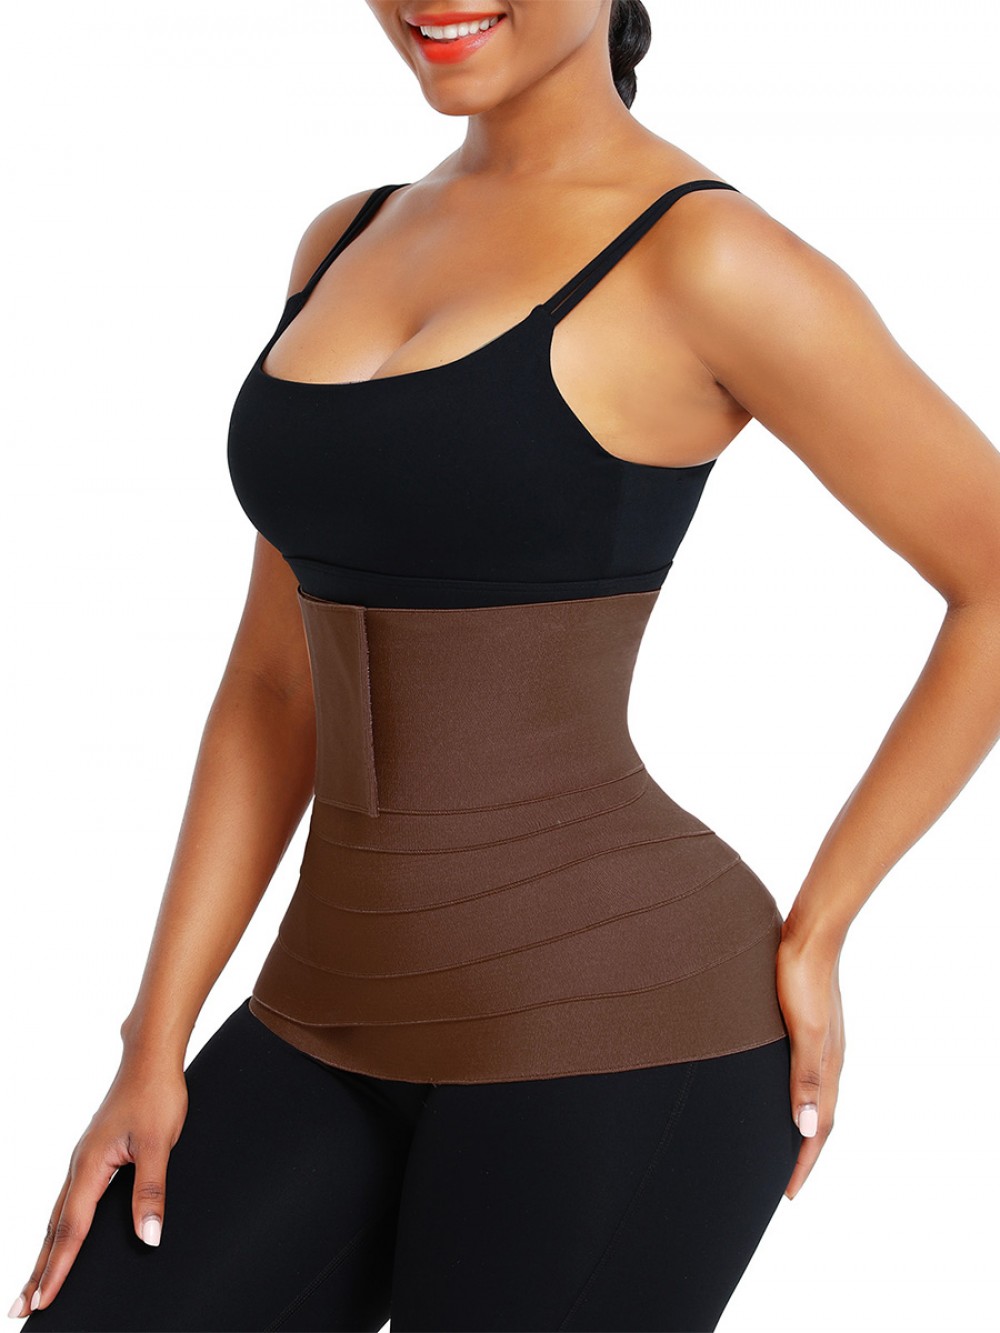 Brown Compression Tummy Trimmer Control Waist Wrap Bandage Belt For Lose Weight